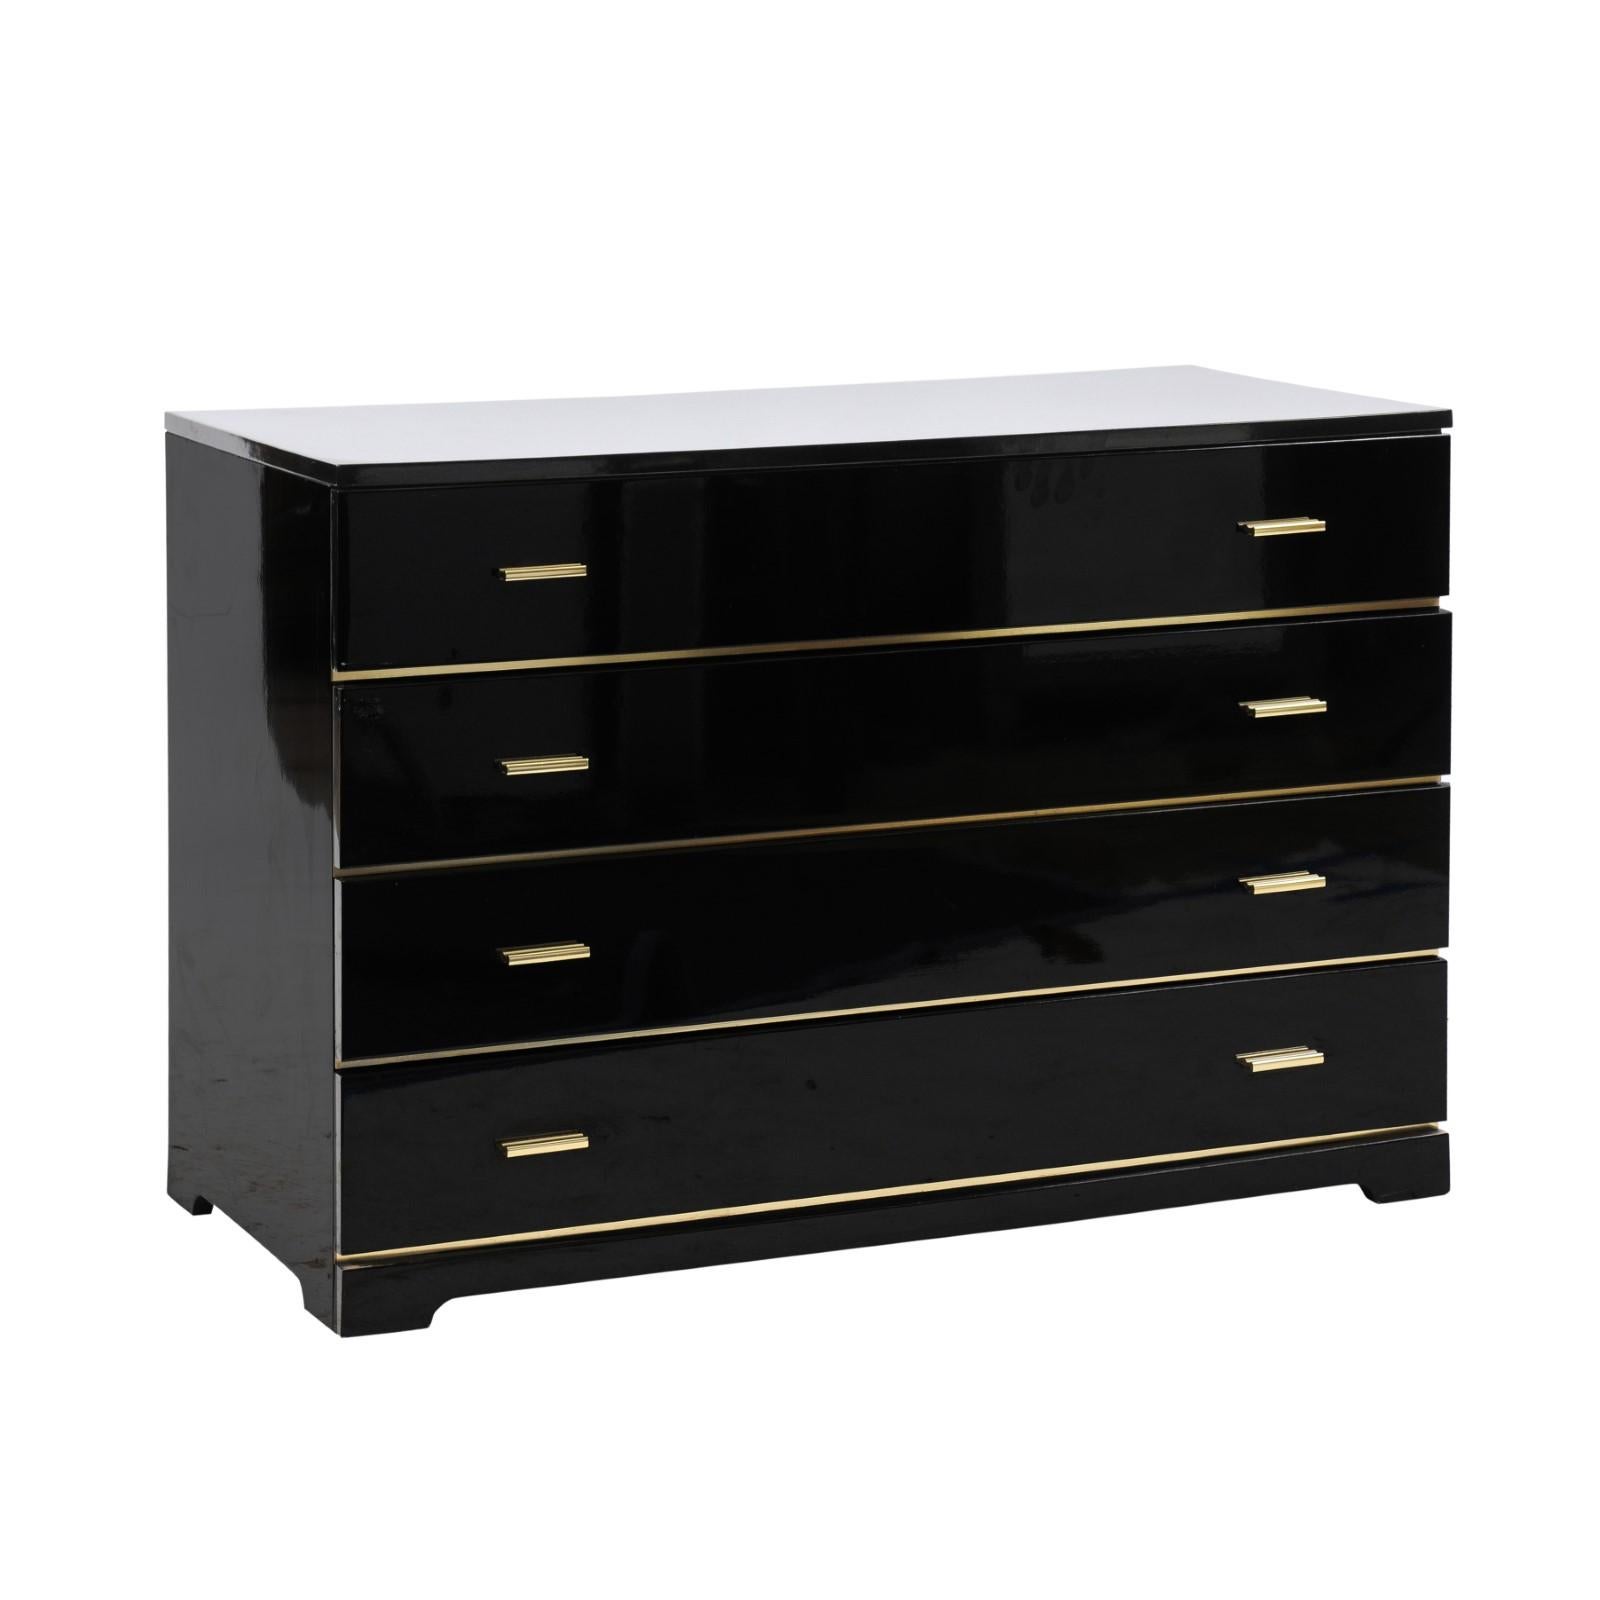 French Roche Bobois 1960s Four-Drawer Black Lacquer Dresser with Brass Hardware